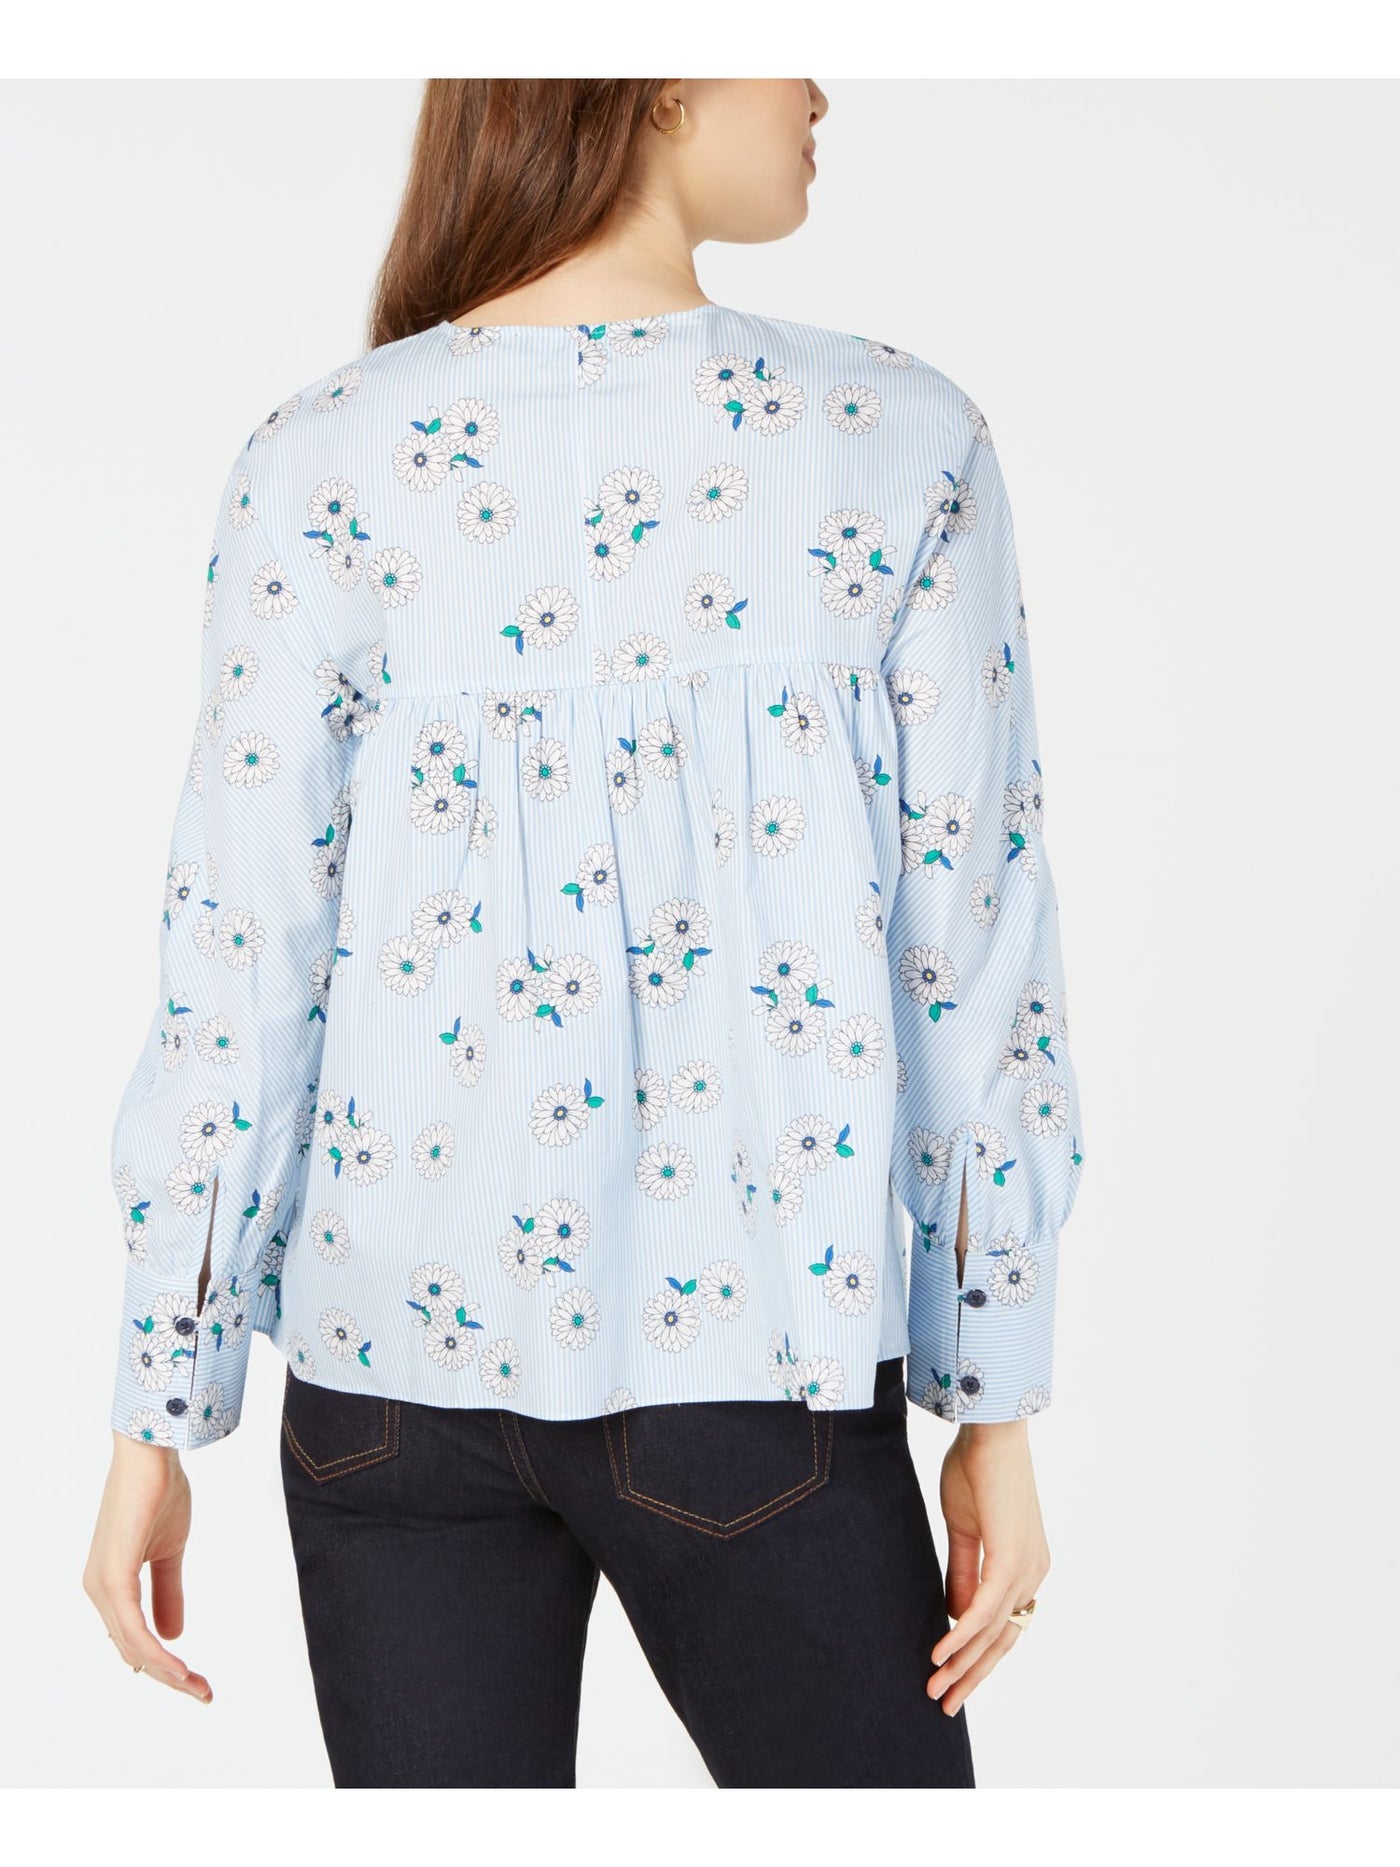 TOMMY HILFIGER Womens Light Blue Floral Long Sleeve Collared Top S\P